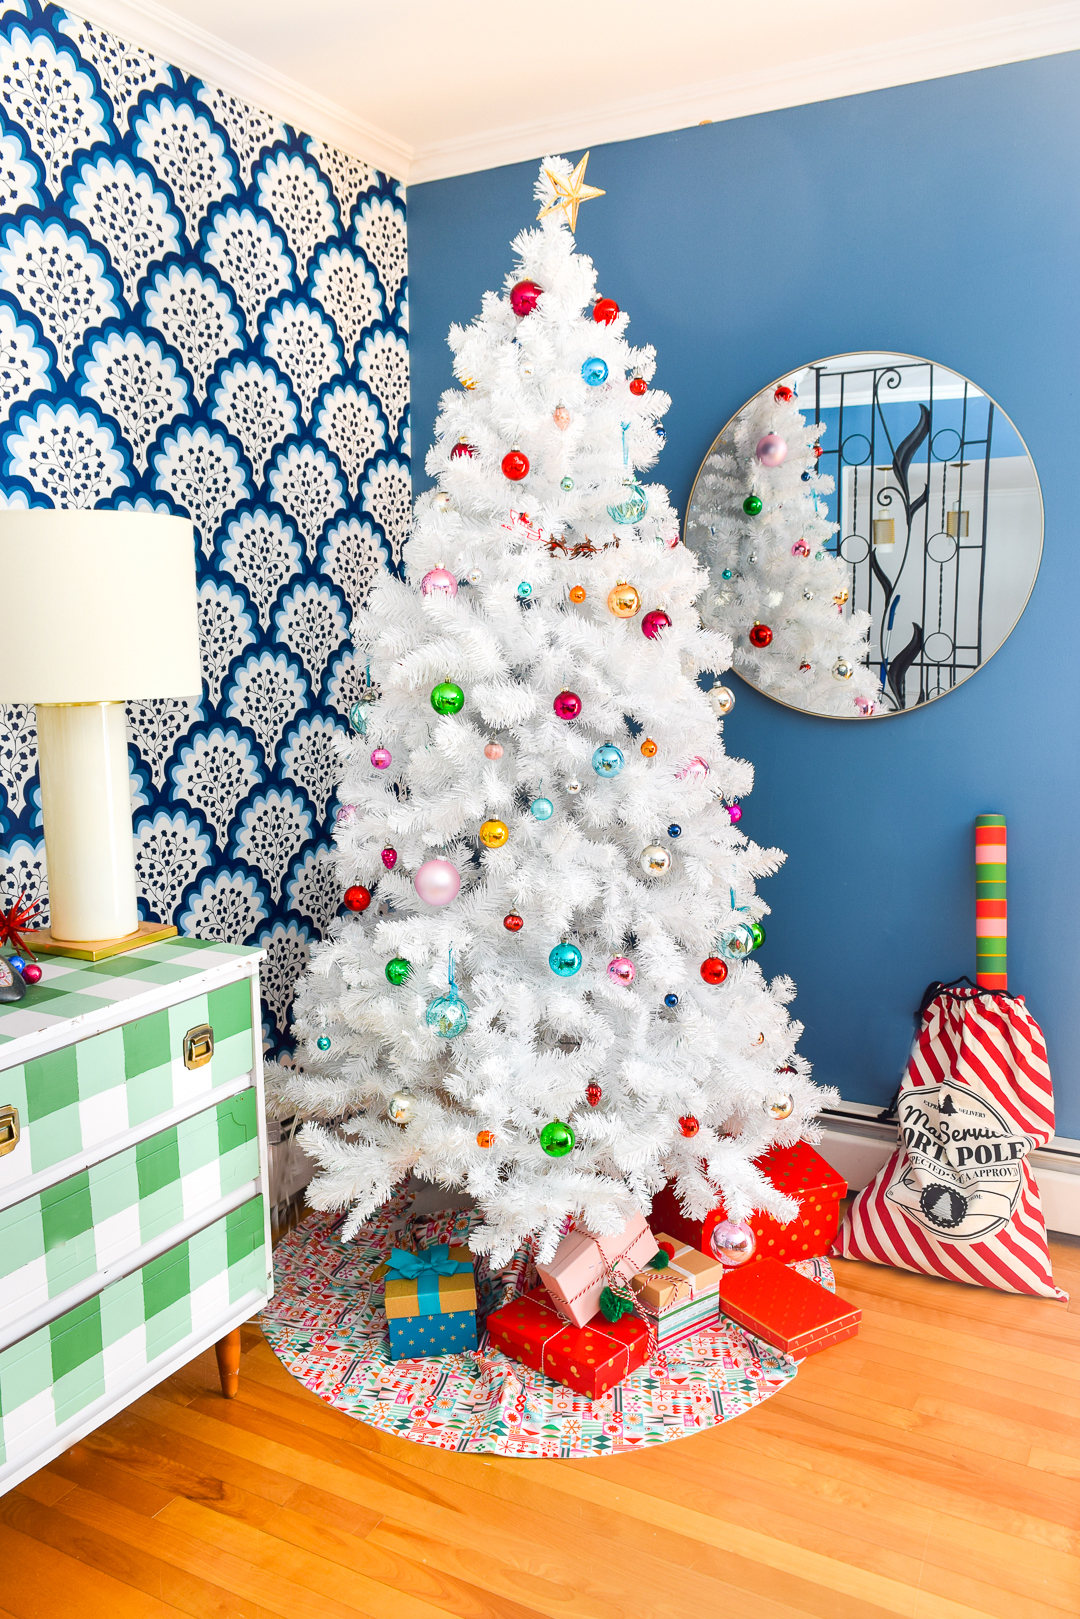 I've got the tree up, the ornaments out, and am showing an odd amount of restraint this year when it comes to accessorizing. Come check out my Retro & Colourful Christmas Living Room! #christmastour #christmasdecor #colourfulchristmas